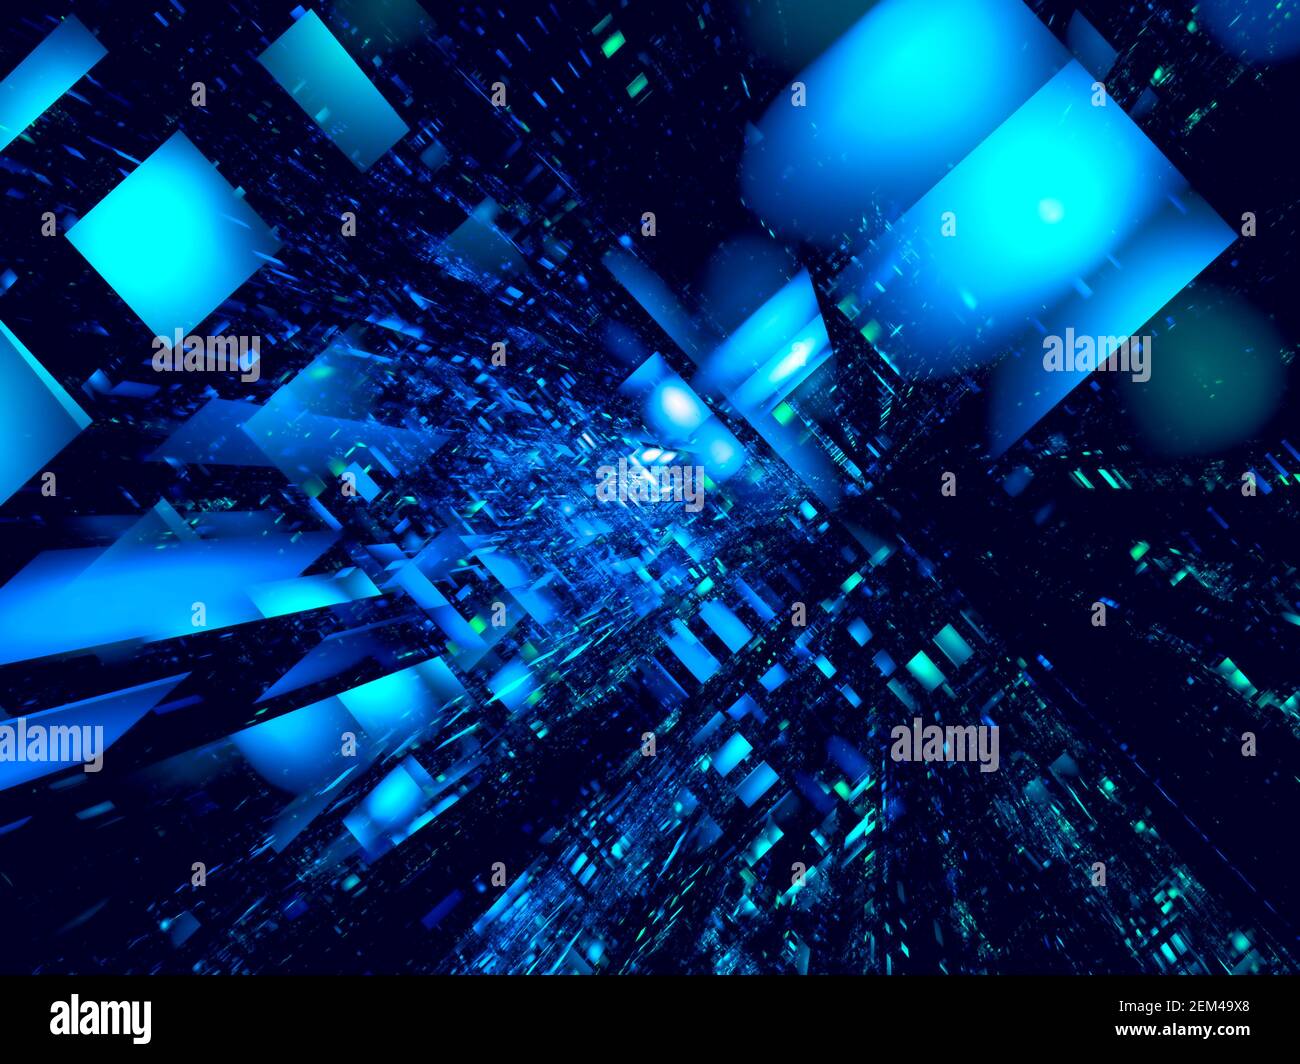 Technology background with perspective effect - abstract 3d illustration Stock Photo